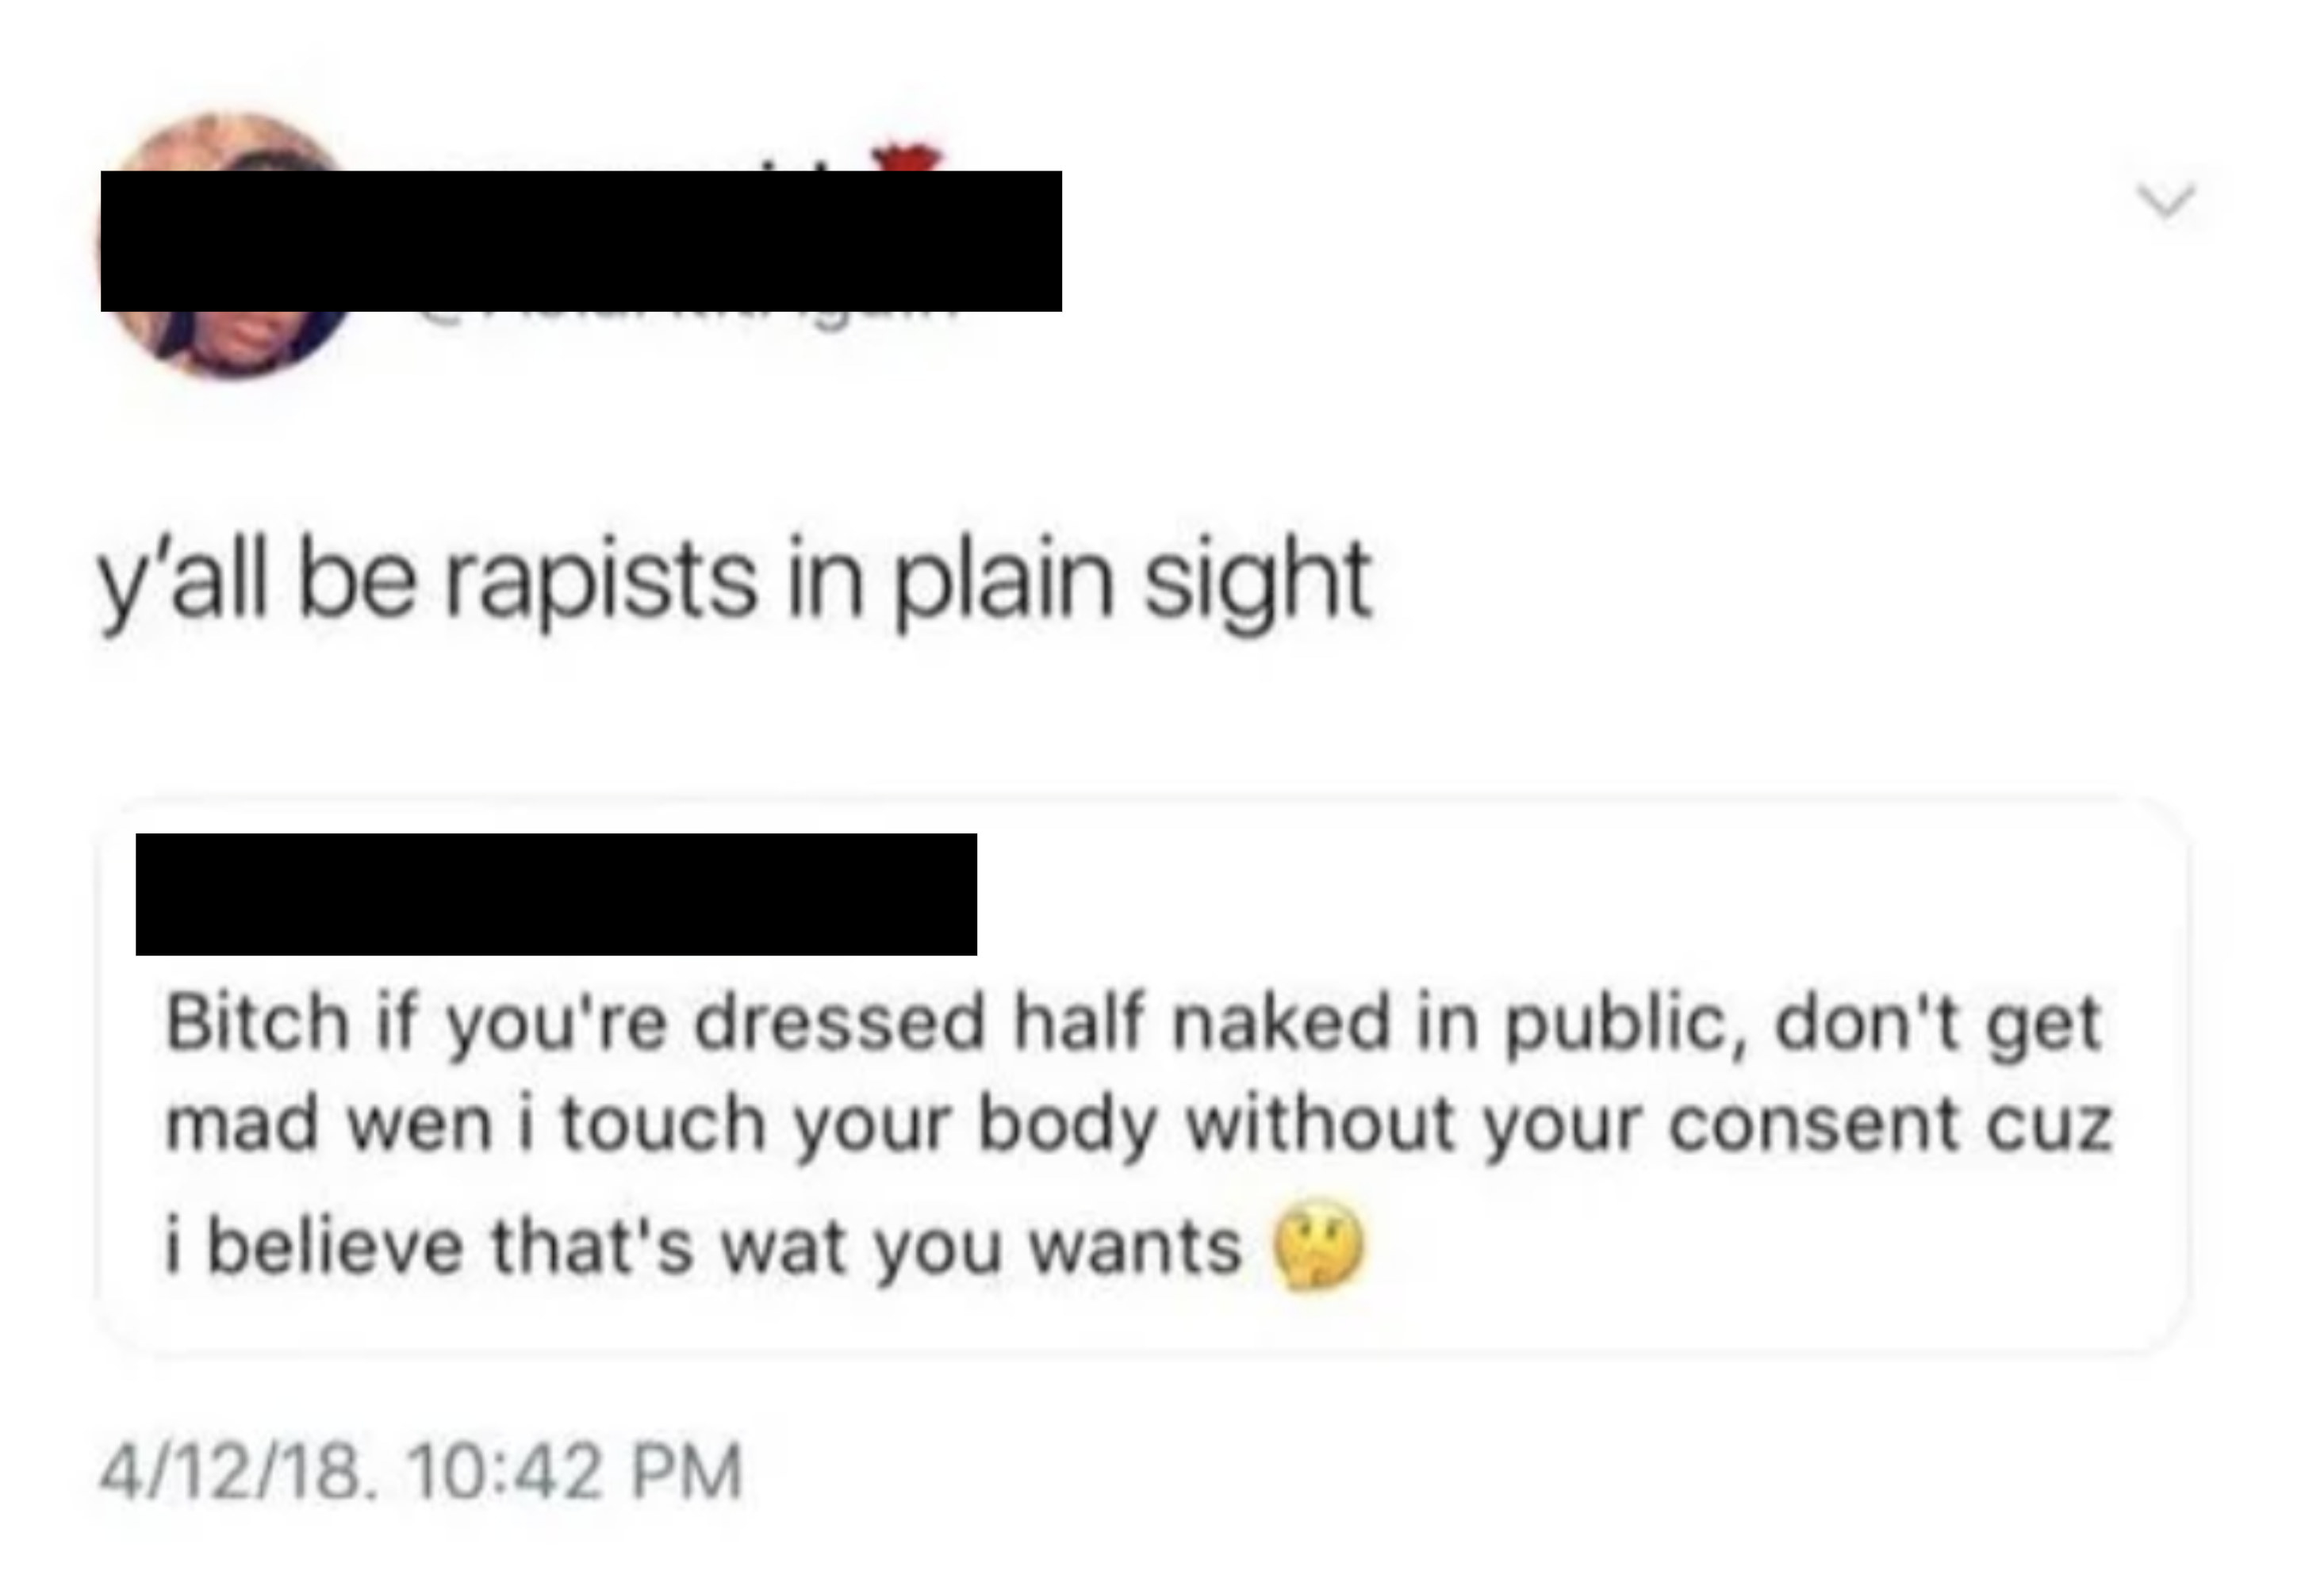 &quot;Bitch if you&#x27;re dressed half naked in public, don&#x27;t get mad wen i touch your body without your consent cuz i believe that&#x27;s wat you wants&quot;